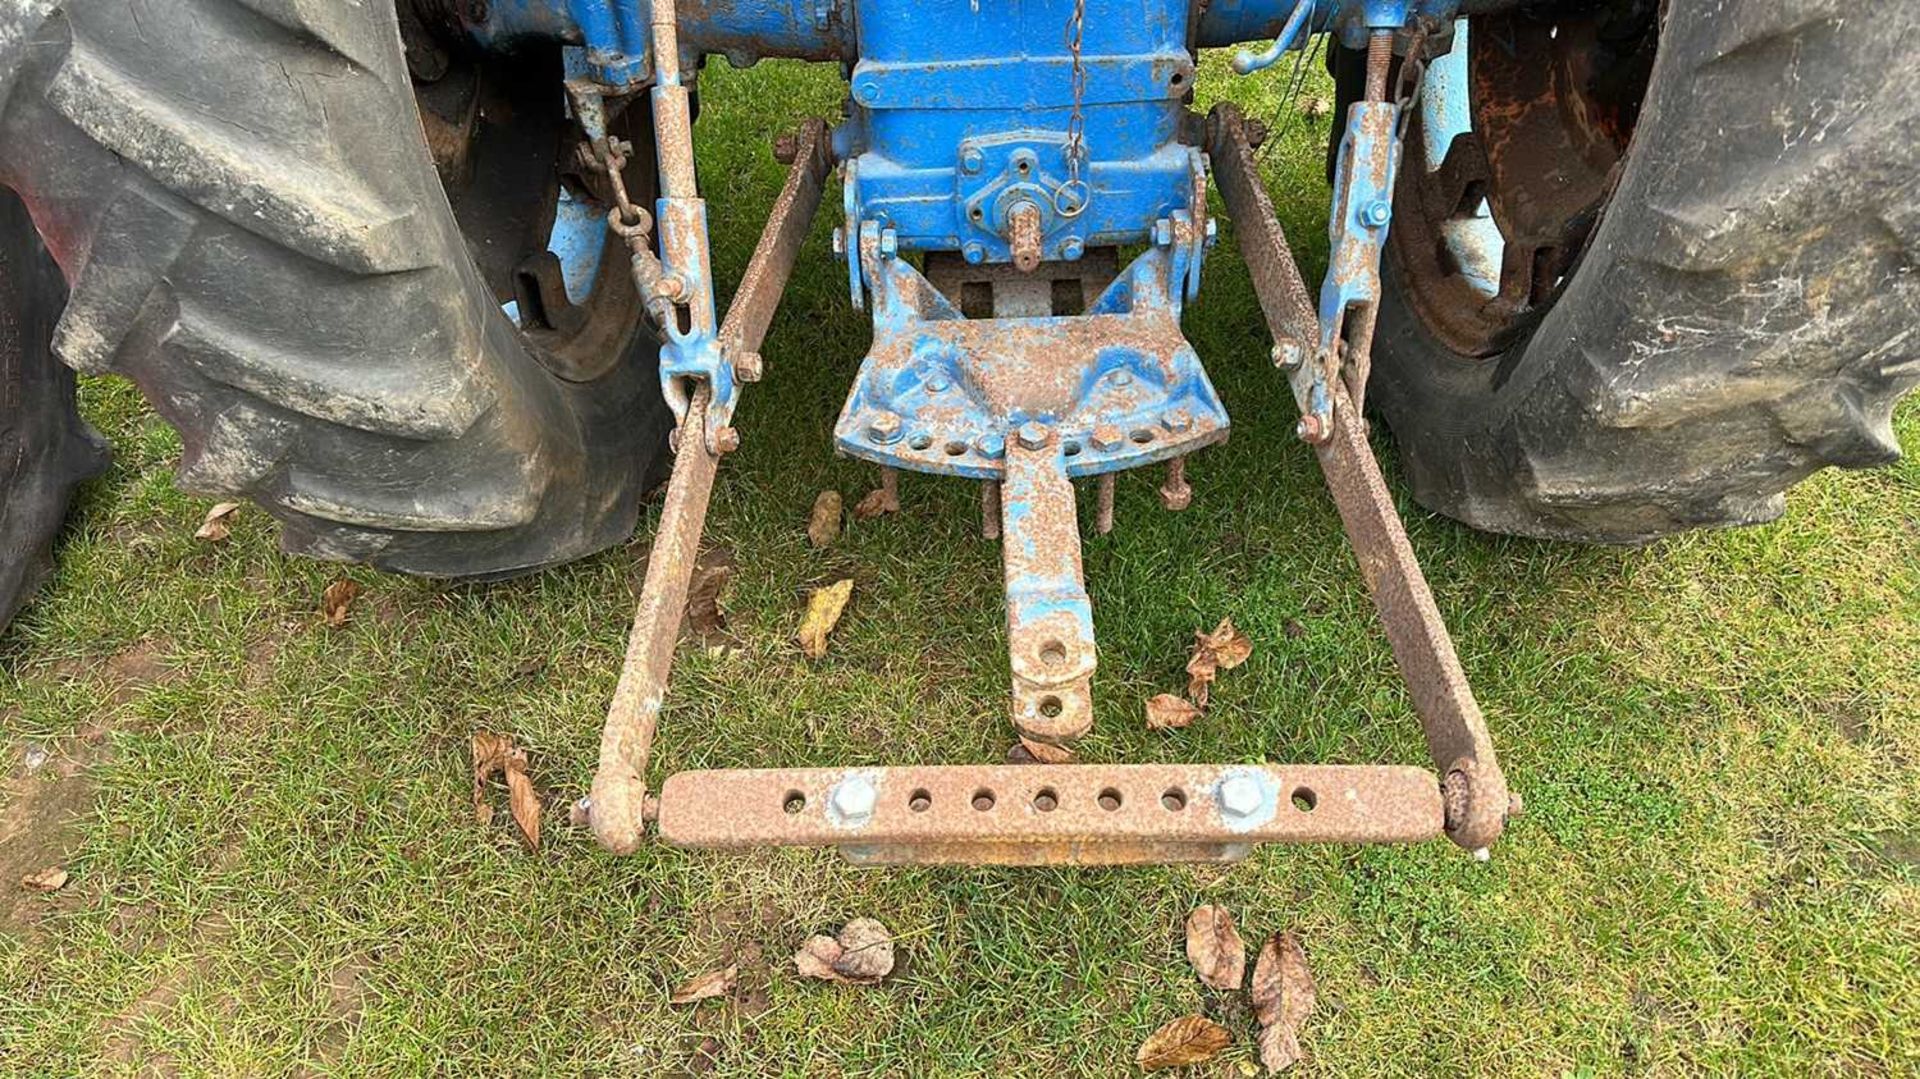 A Fordson Tractor with front loader arms, requiring full restoration - Image 13 of 14